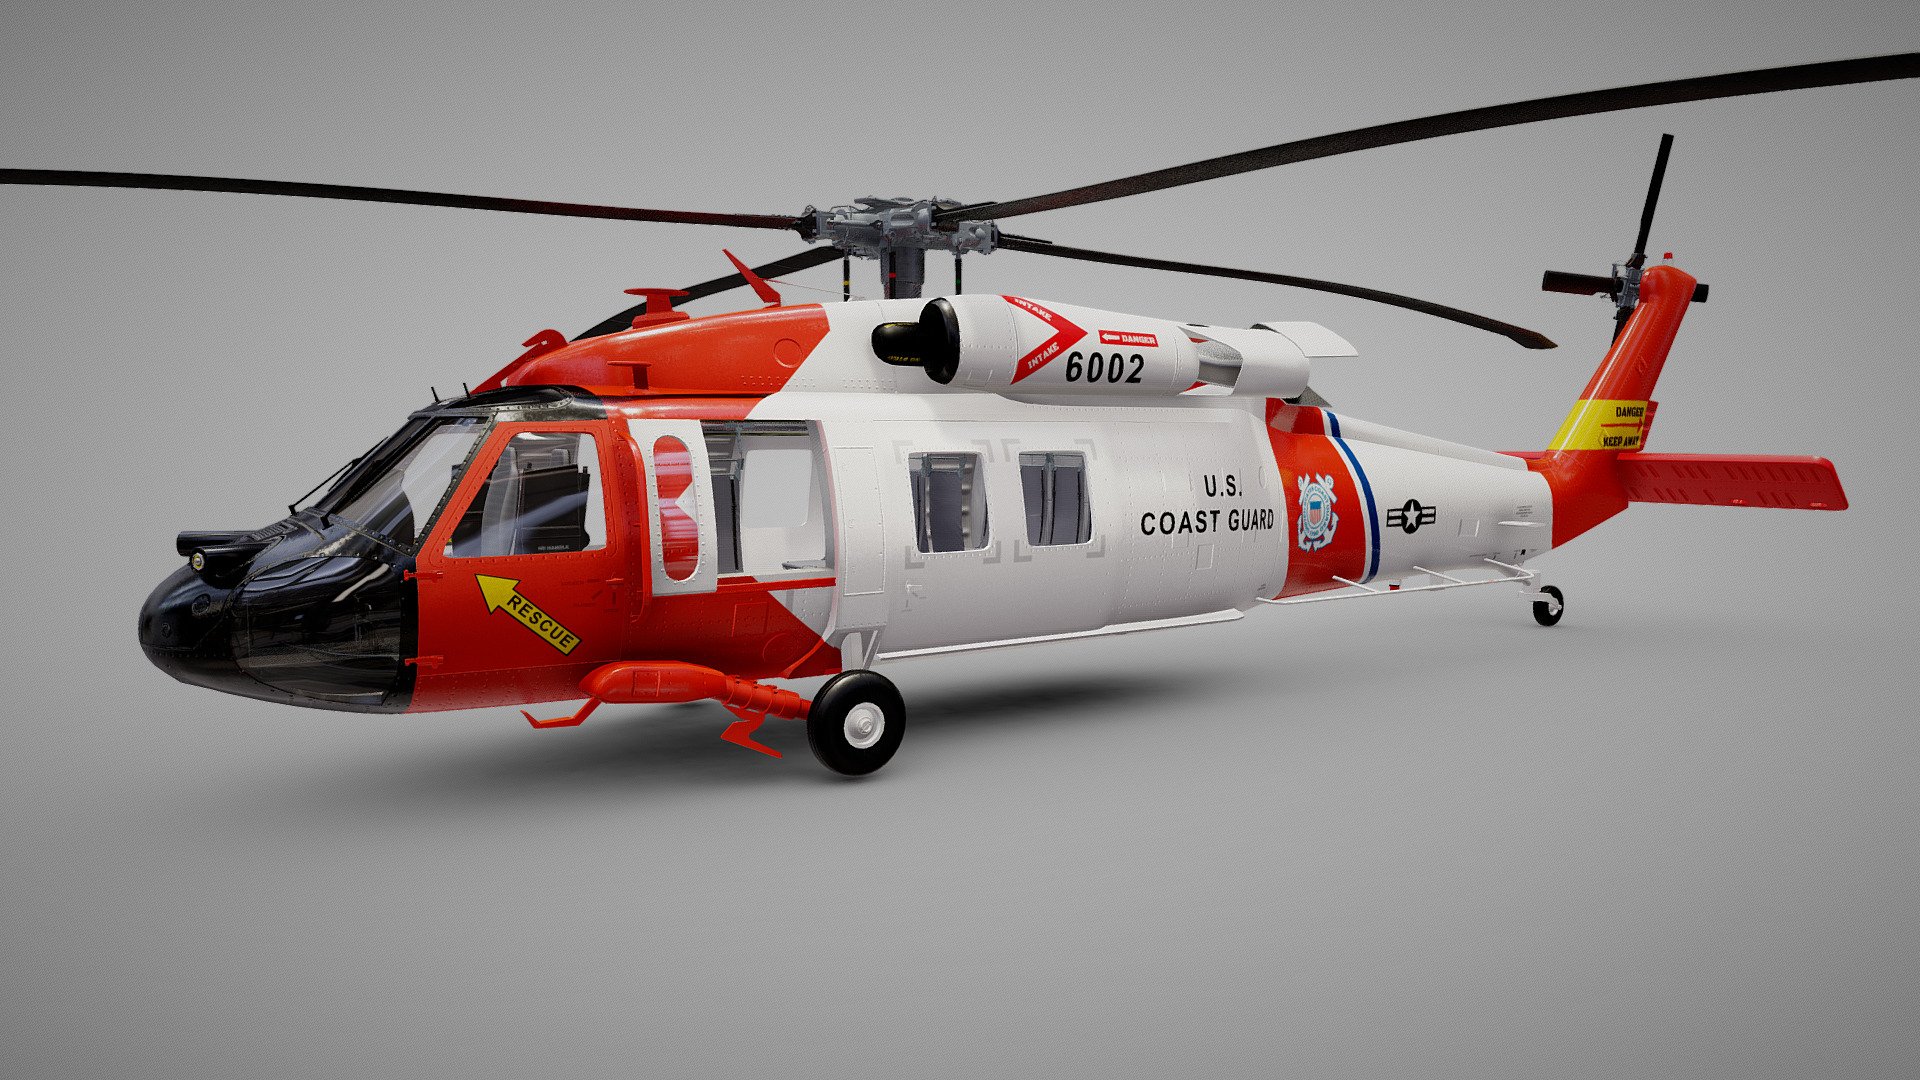 The US Coast Guard actually uses HH-60J / MH-60T Jayhawk helicopter, this is the UH-60 Blackhawk in Coast Guard paint job 


Detailed cockpit instruments 
Baked textures
8k textures for main body
4k textures for everyting else

This model also Includes the following textures skins


U.S Customs and Border Protection
Hambulance
U.S Coast Guard
U.S Navy
Colombian Police
L.A County Fire
US Army
 - Sikorsky UH-60 US Coast Guard - Buy Royalty Free 3D model by luisbcompany 3d model